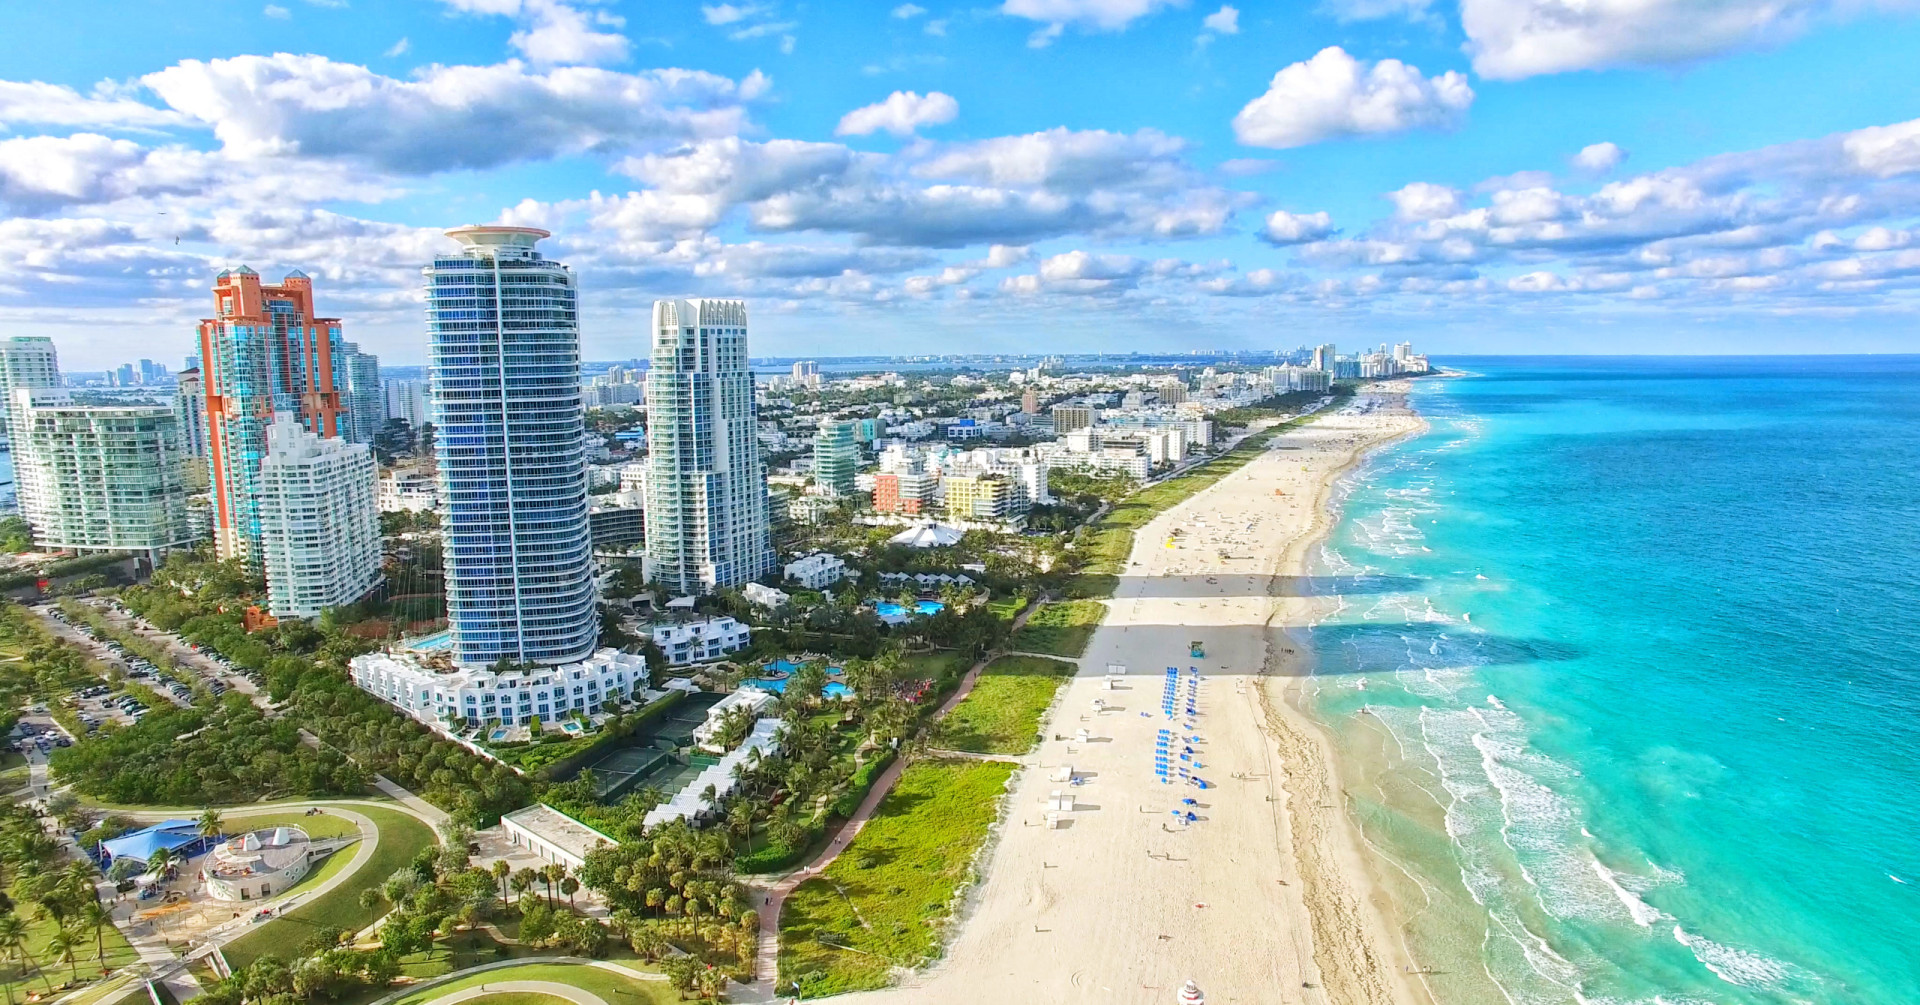 <p>Miami, a sun-drenched paradise with a rent index of 72.1, is Florida's economic powerhouse. Famous for its beaches and the world's largest cruise ship port, it's as dynamic as it is expensive.</p><p>You may also like:<a href="https://www.starsinsider.com/n/286504?utm_source=msn.com&utm_medium=display&utm_campaign=referral_description&utm_content=651794en-in"> Fascinating facts you didn’t know about Disney parks</a></p>